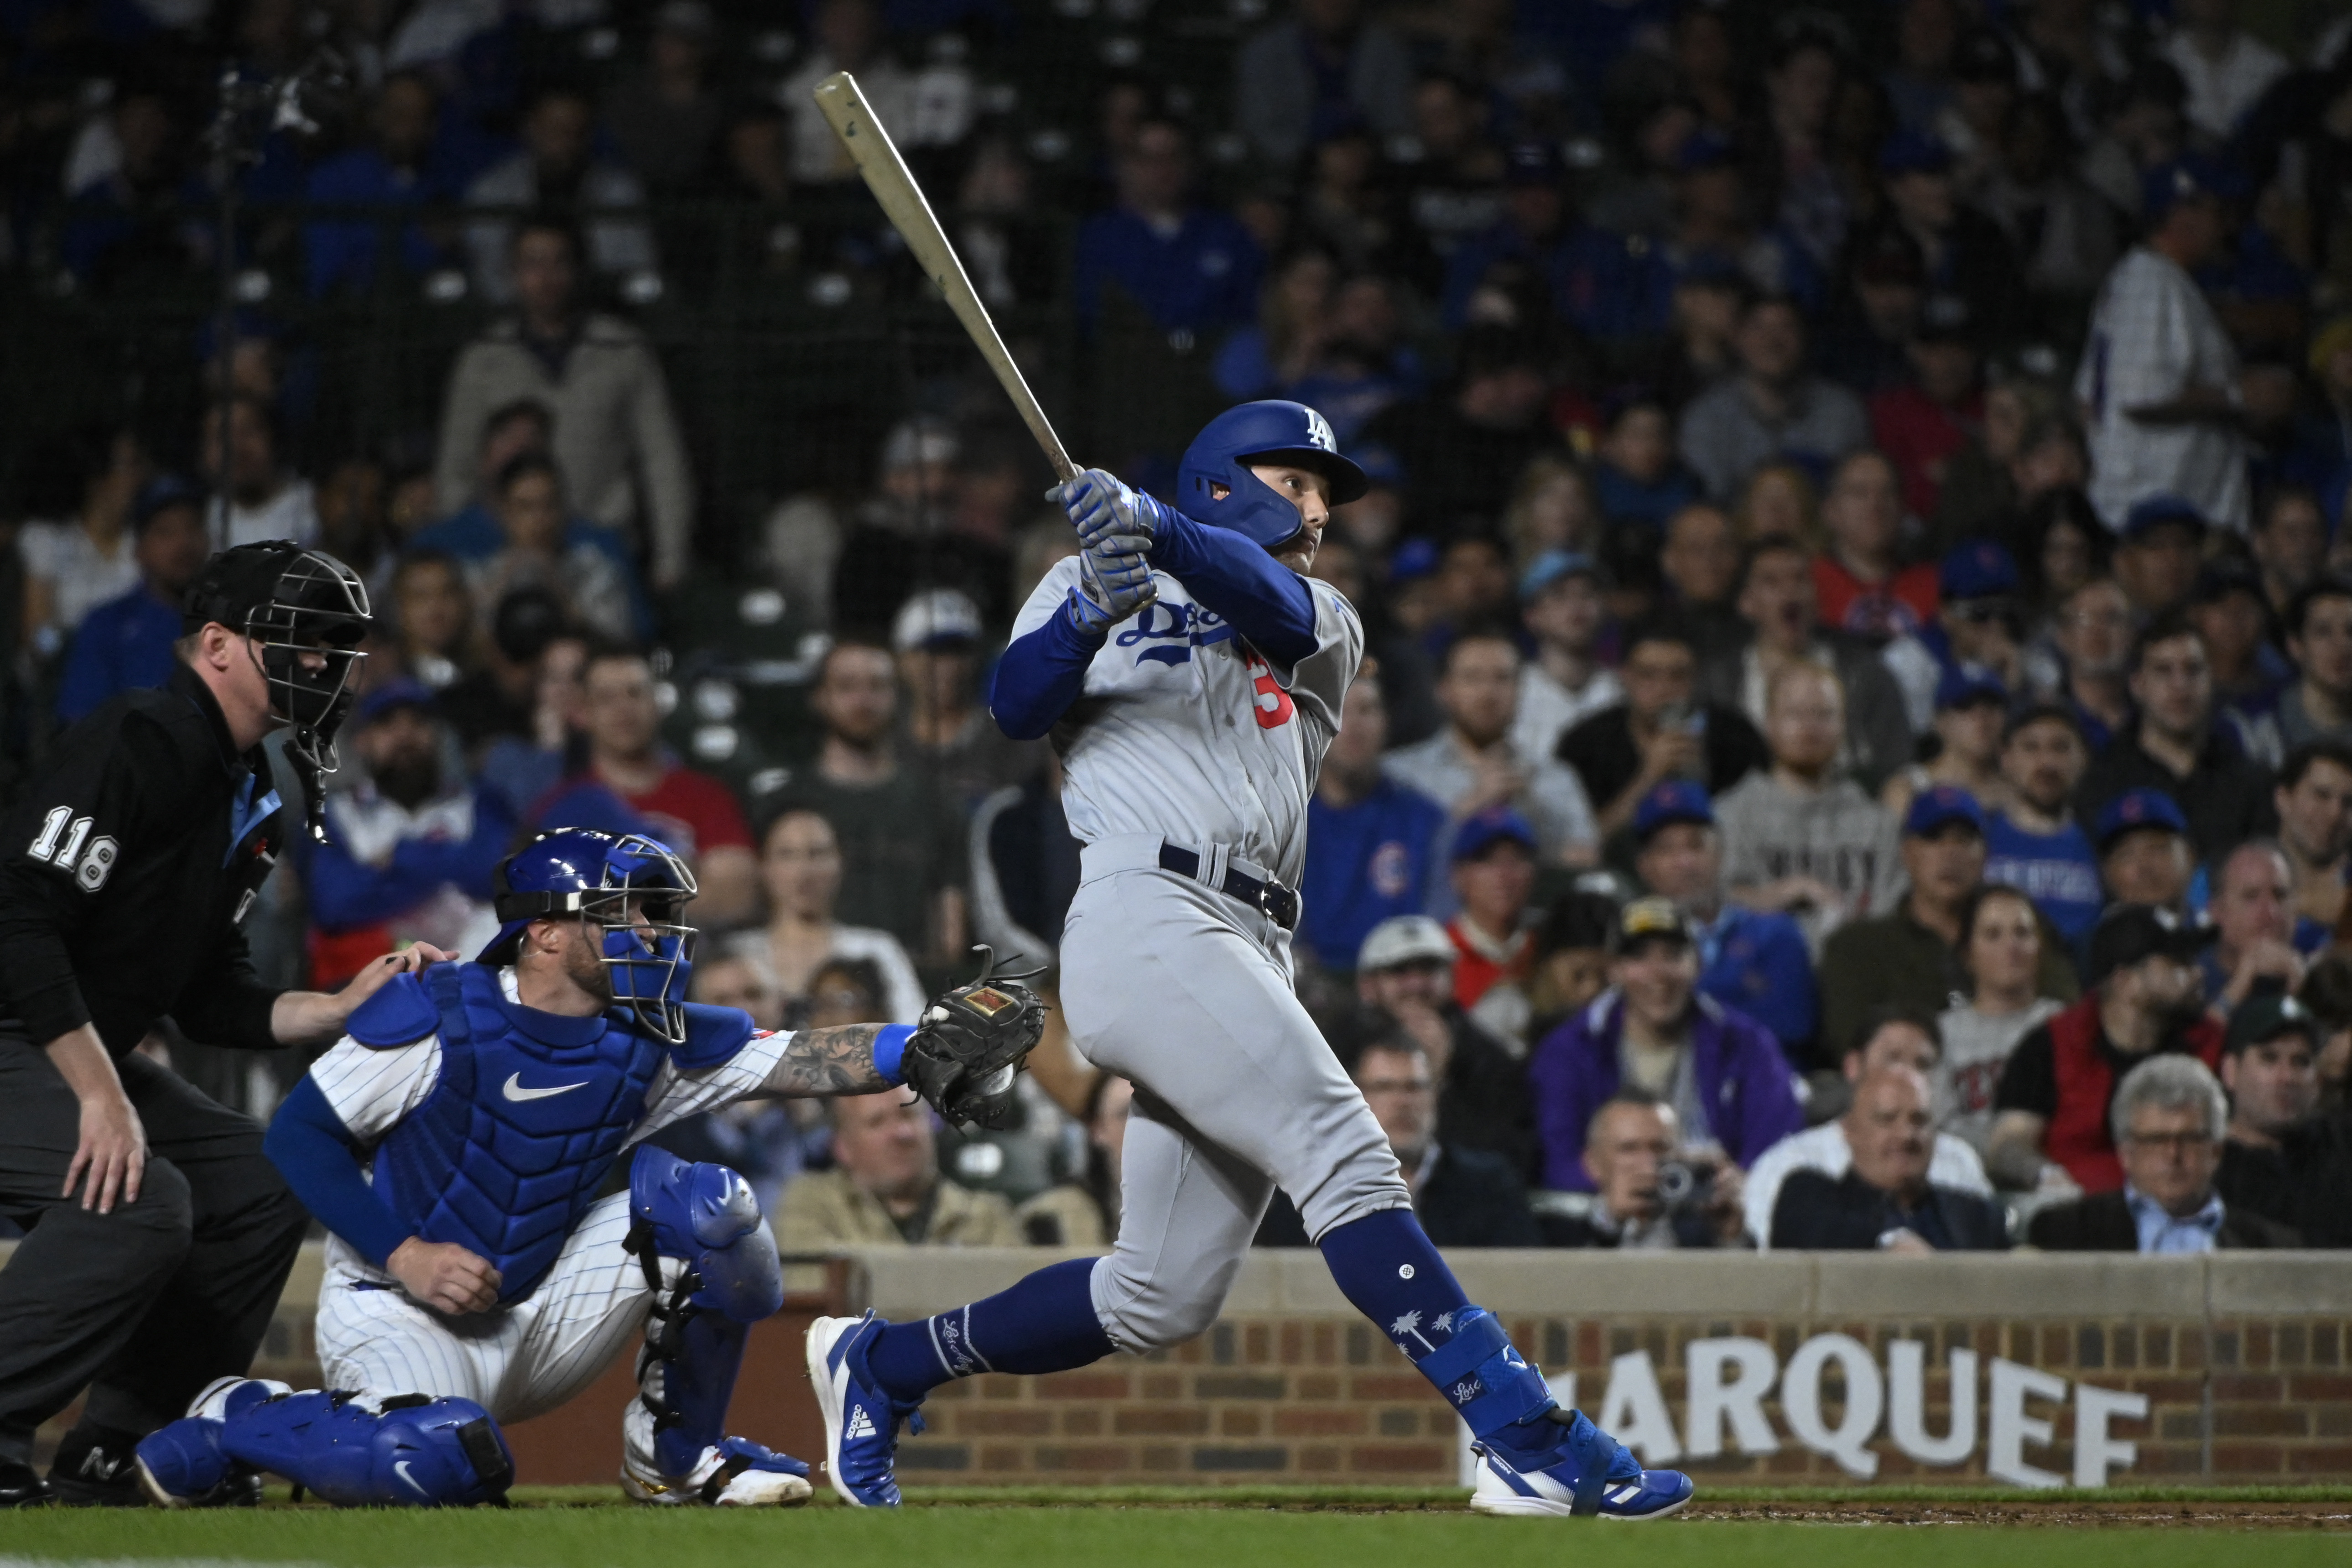 James Outman's 9th-inning grand slam propels Dodgers past Cubs